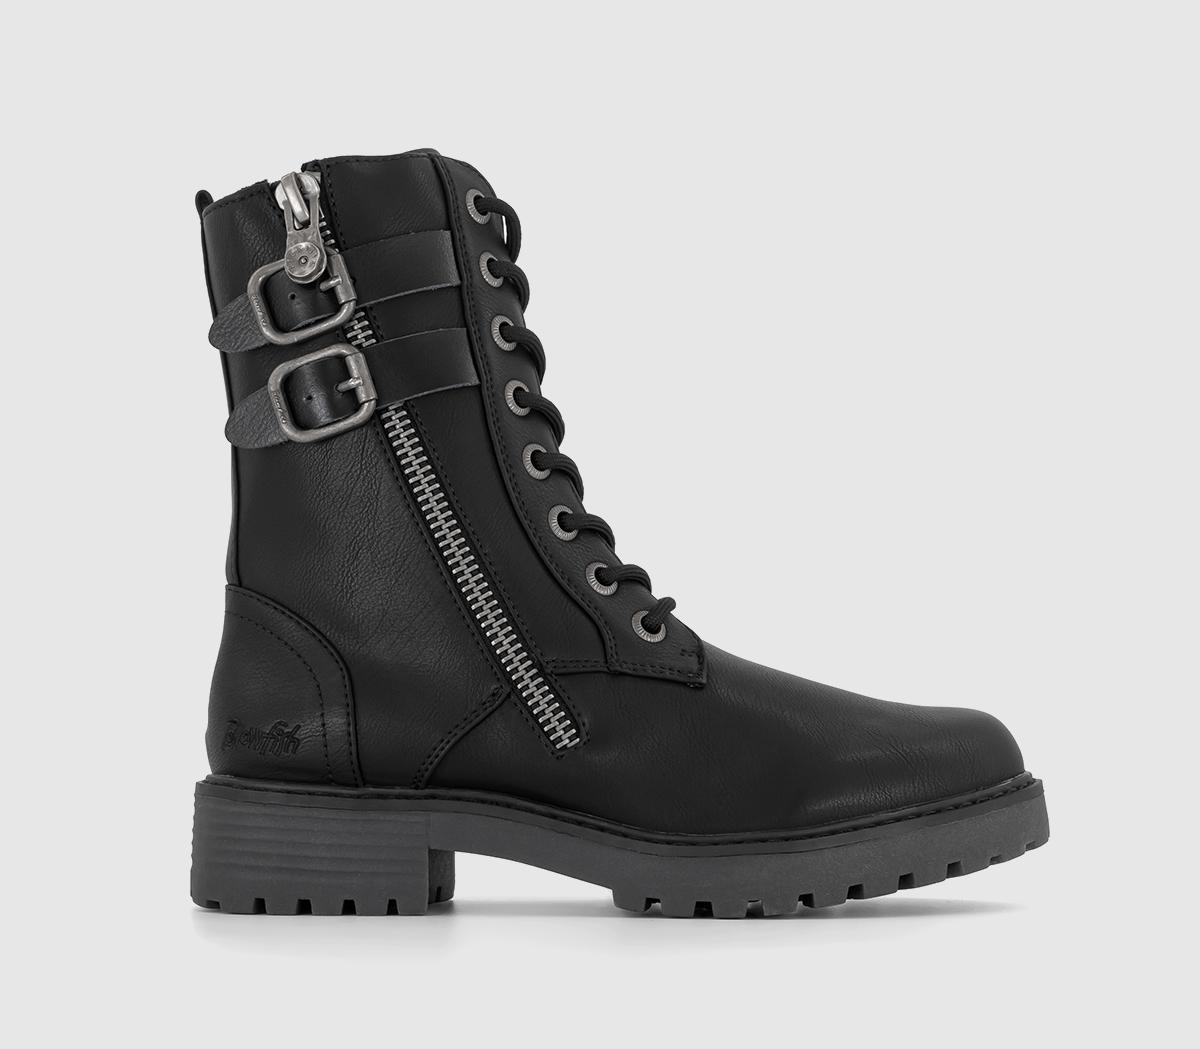 Rissi Buckle Boots Black Local Sheriff